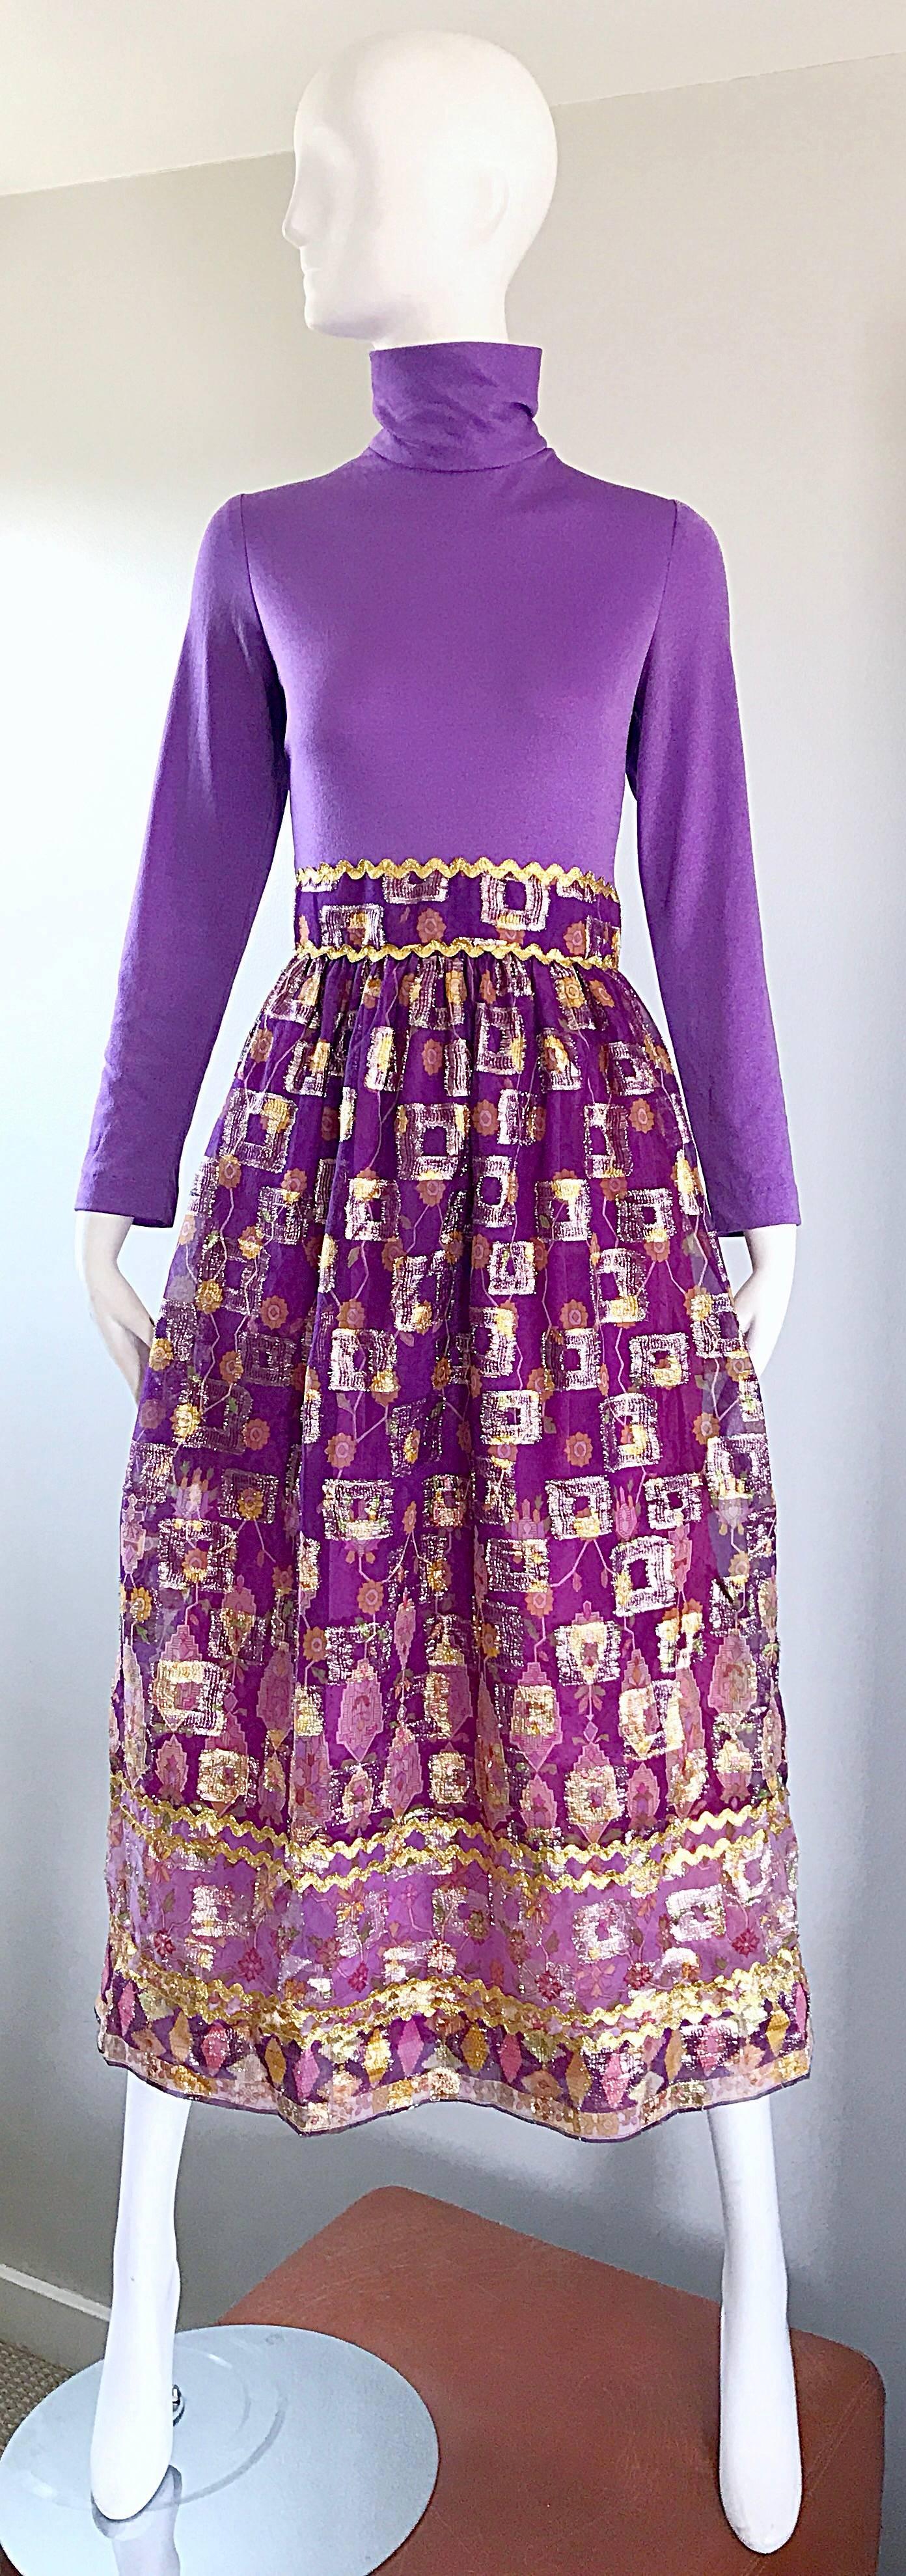 Gorgeous 70s ethnic batik print high neck purple / lilac long sleeve ombre midi dress / gown! Features a fitted soft stretch jersey bodice, with a full metallic semi sheer chiffon skirt (fully lined). Hidden zipper up th eback with hook-and-eye